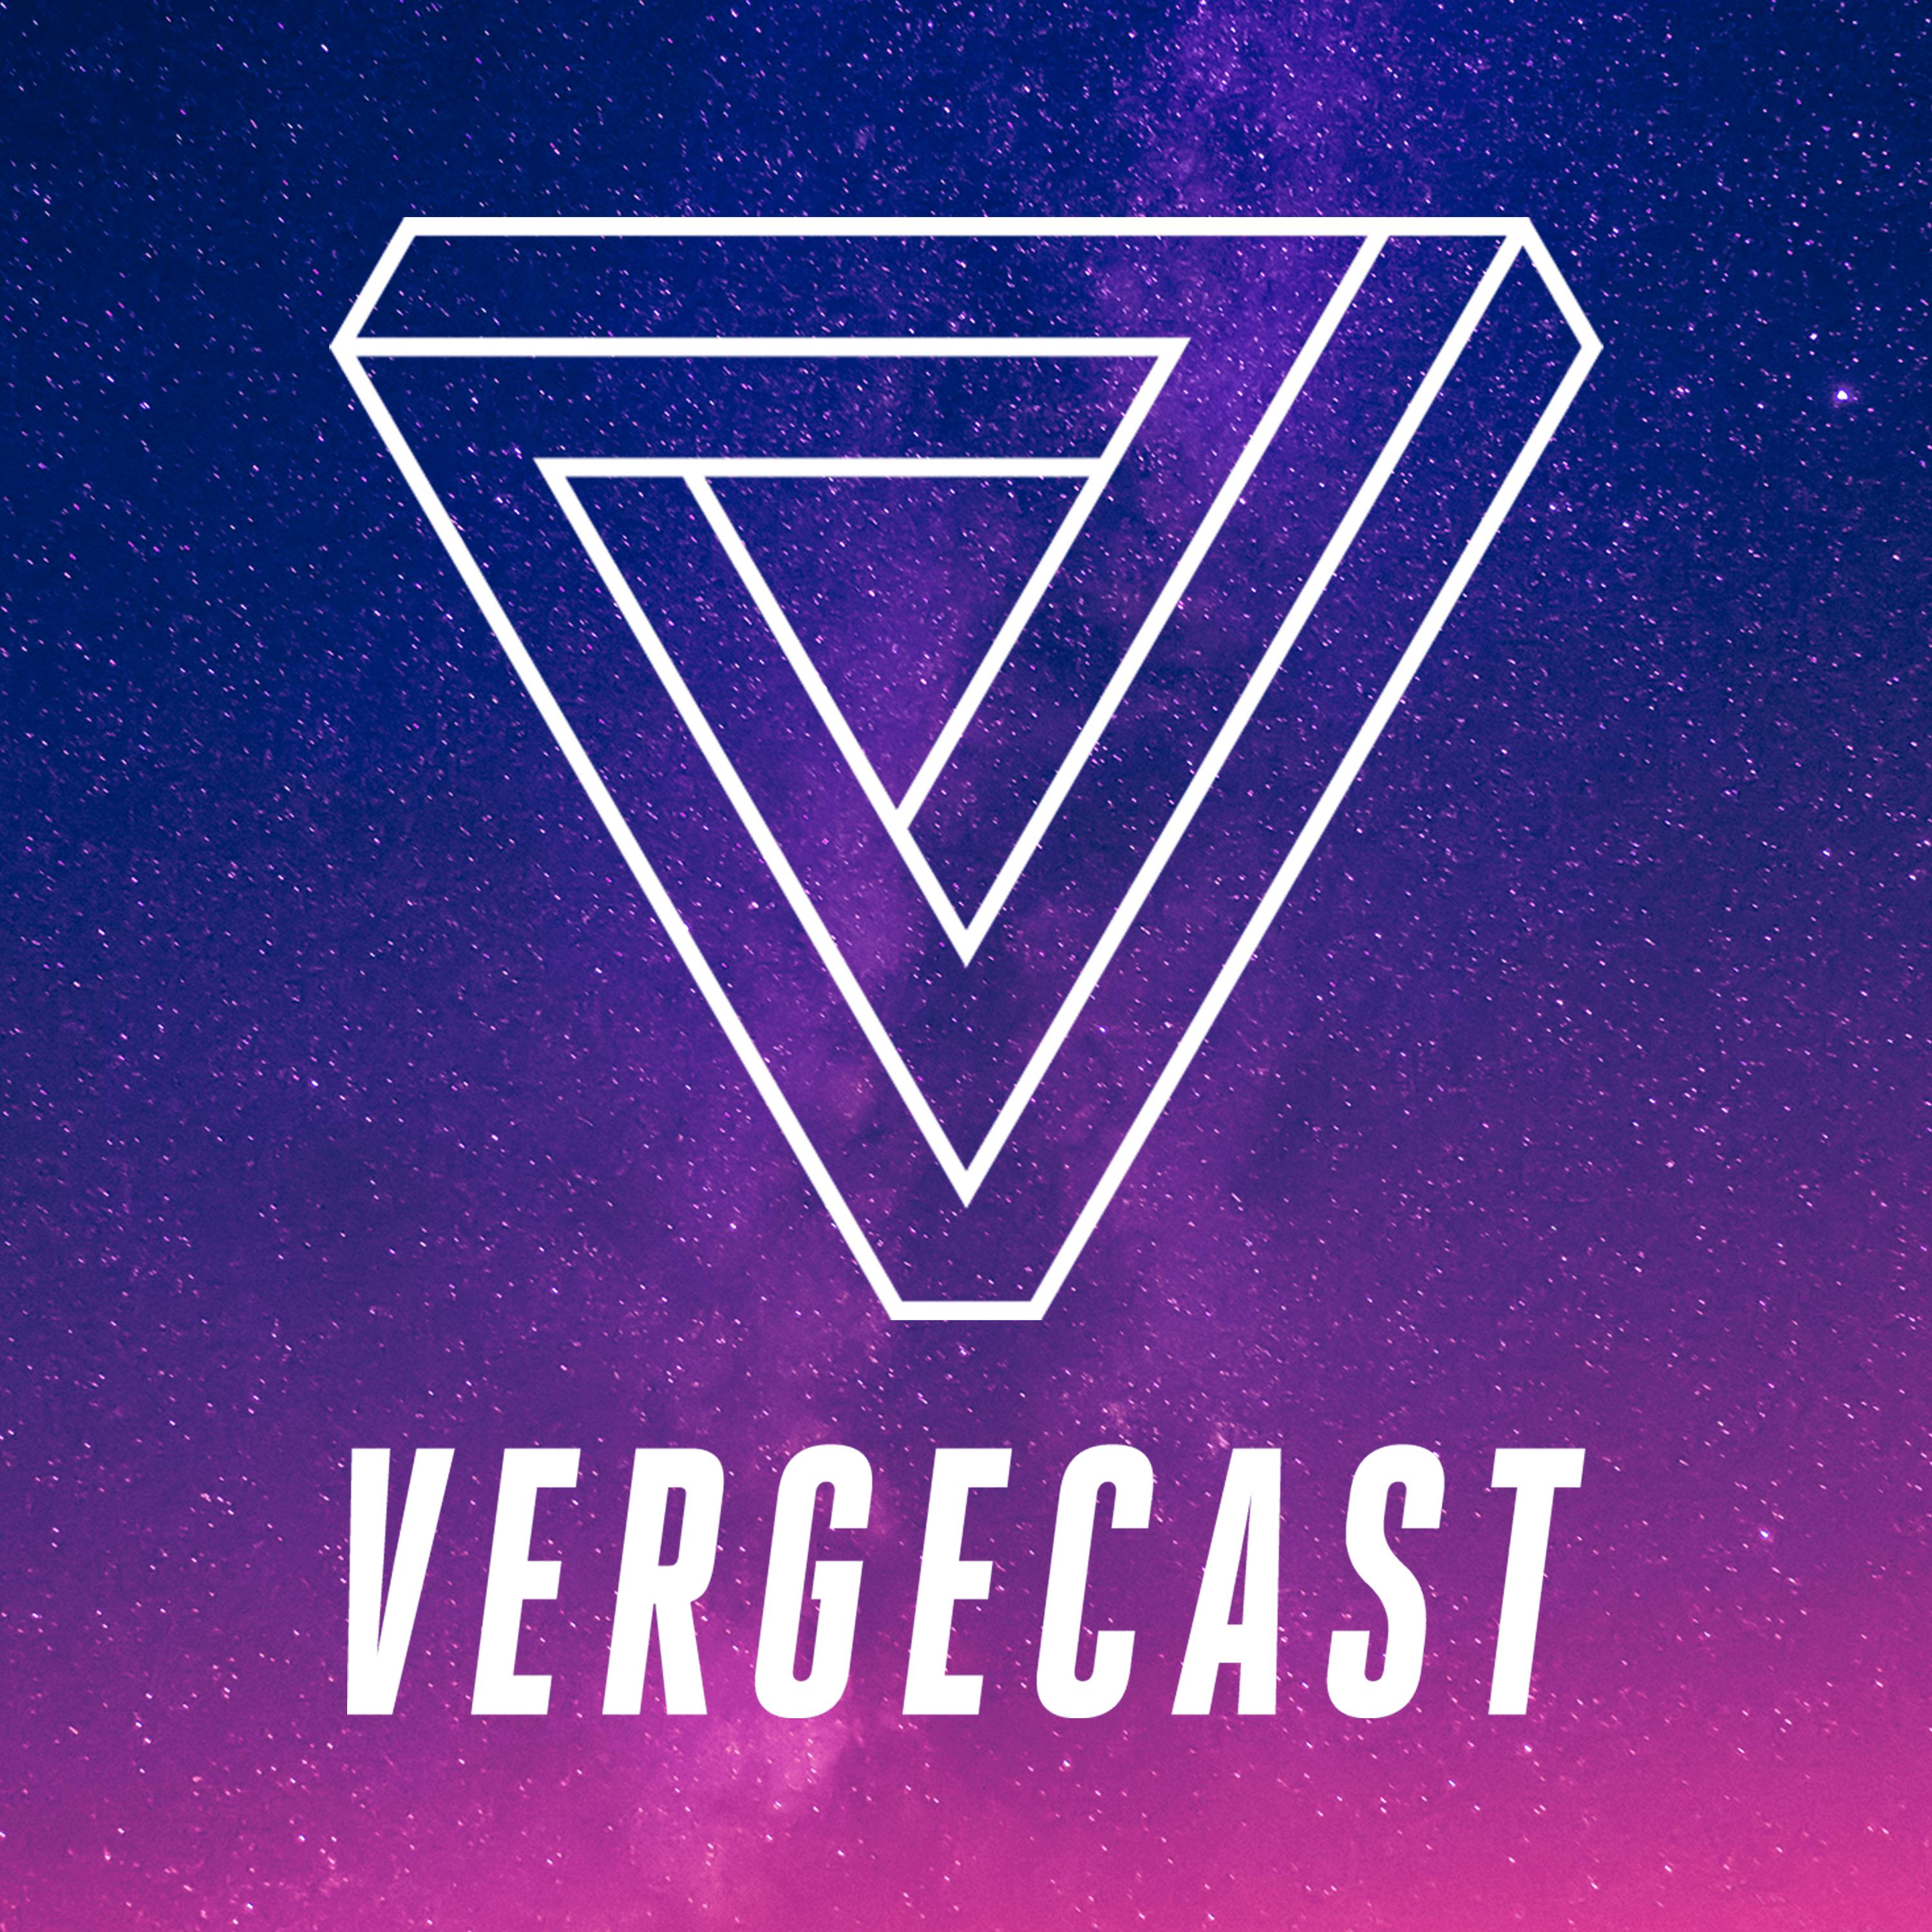 The Vergecast Podcast Addict - hillery delete it parody roblox song id